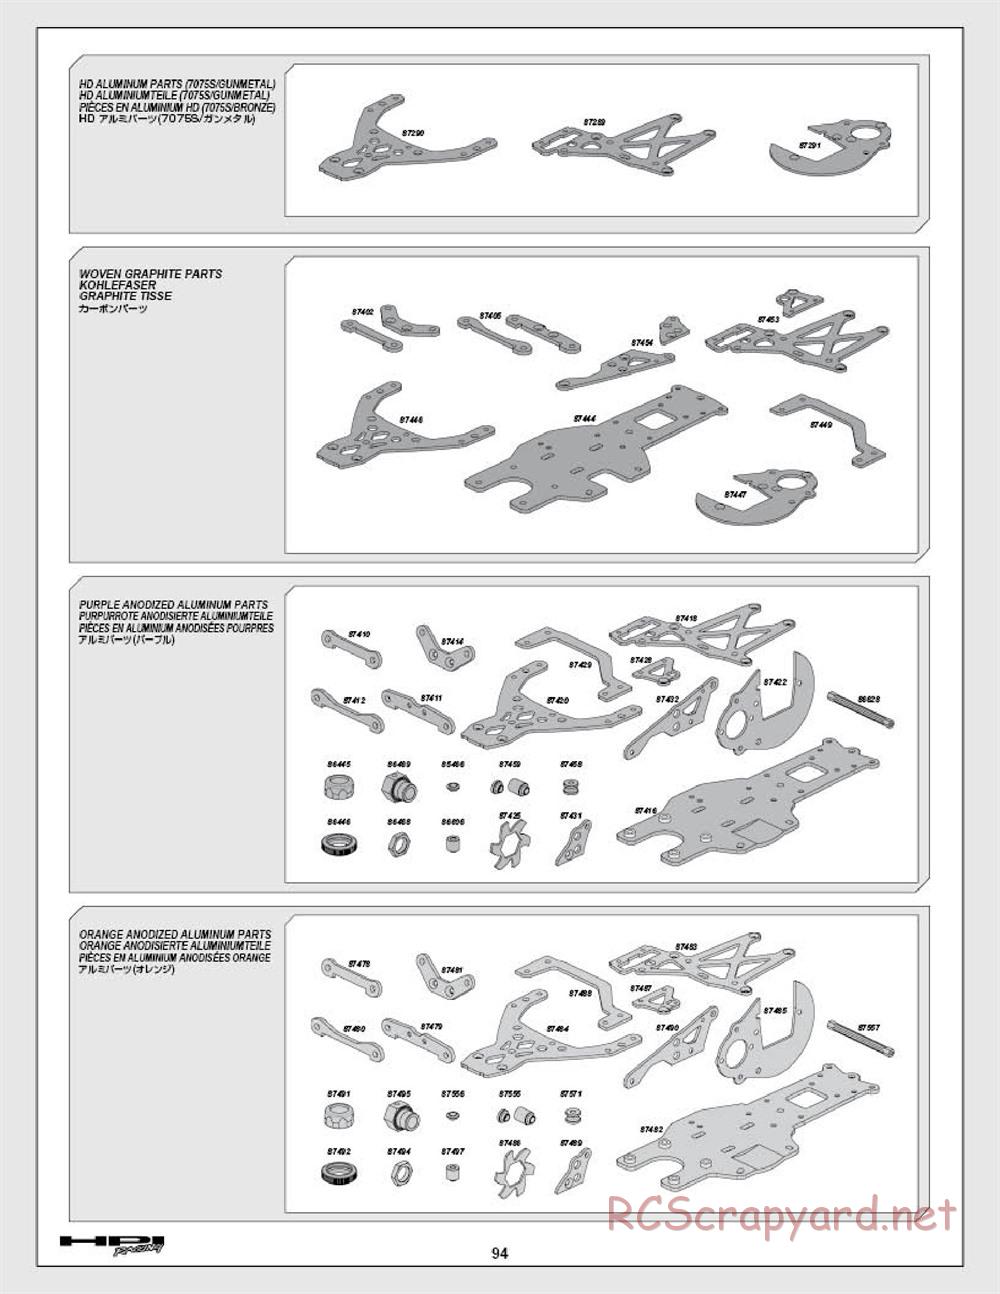 HPI - Baja 5SC - Exploded View - Page 94